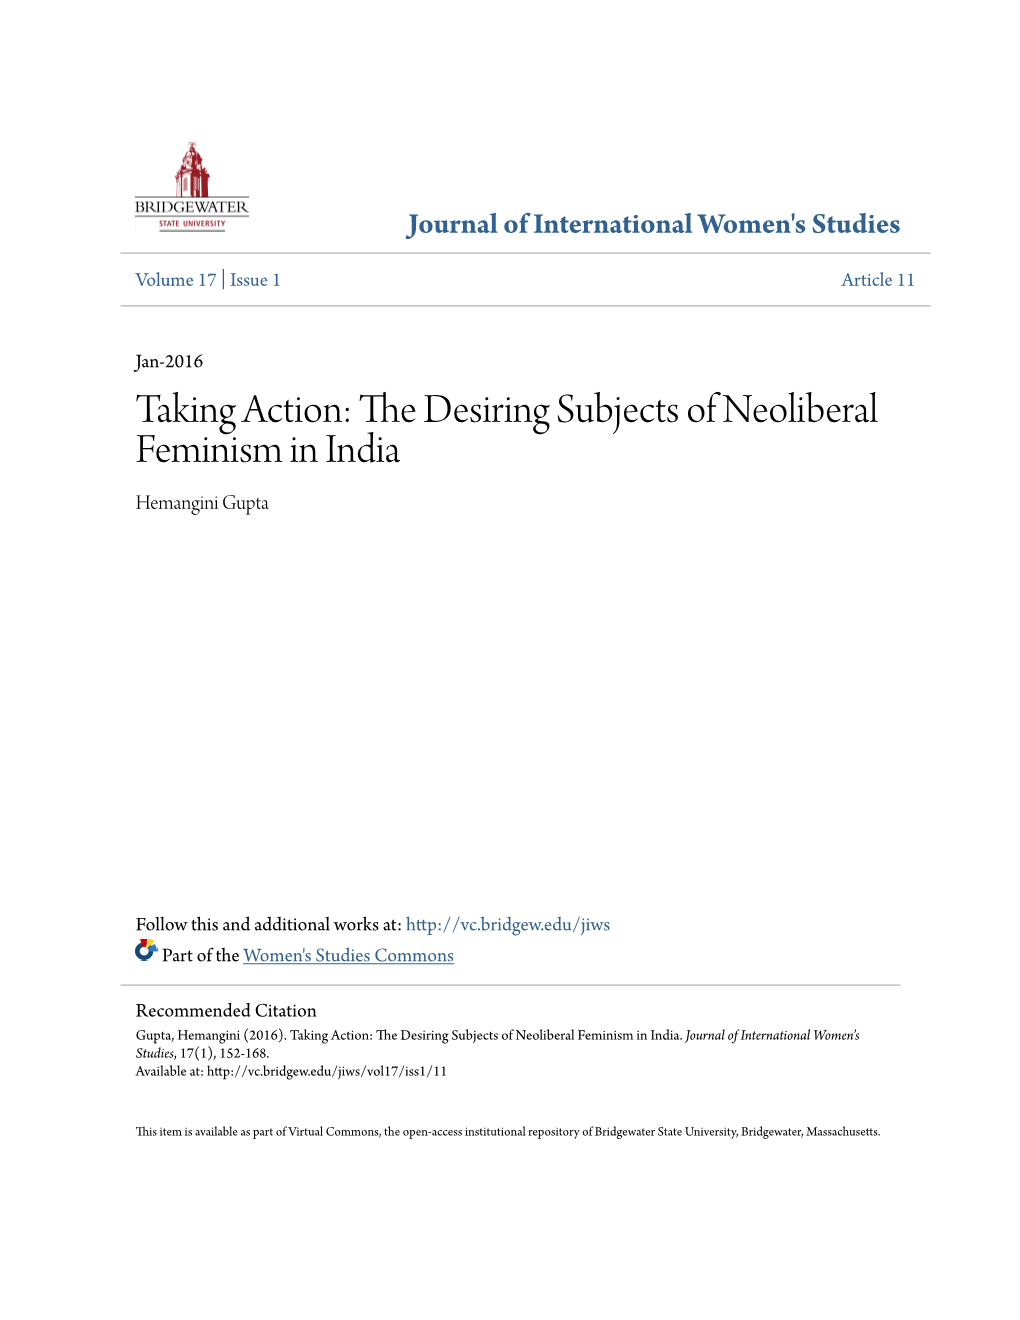 Taking Action: the Desiring Subjects of Neoliberal Feminism in India